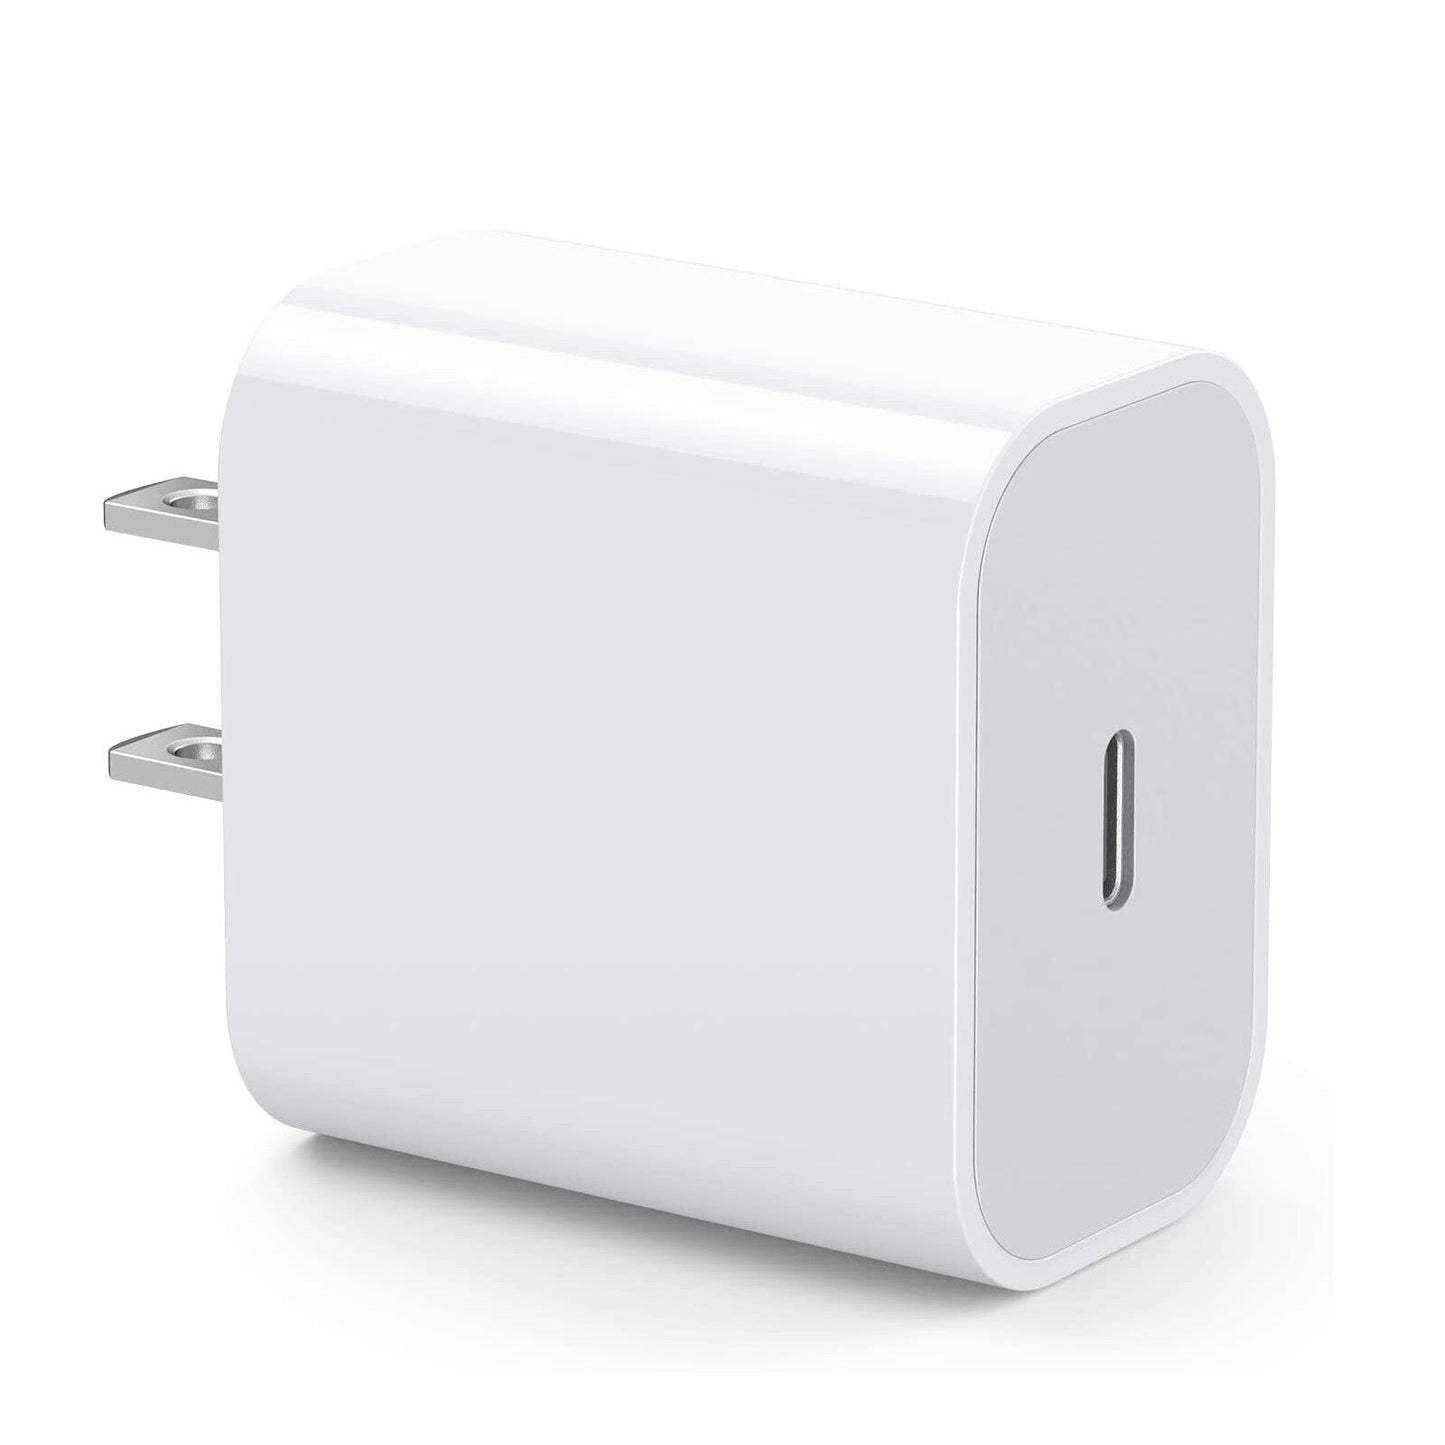 **2 Units**  Fast PD Charger 20W USB-C Power Adapter For iPhone 13 and 12 Series